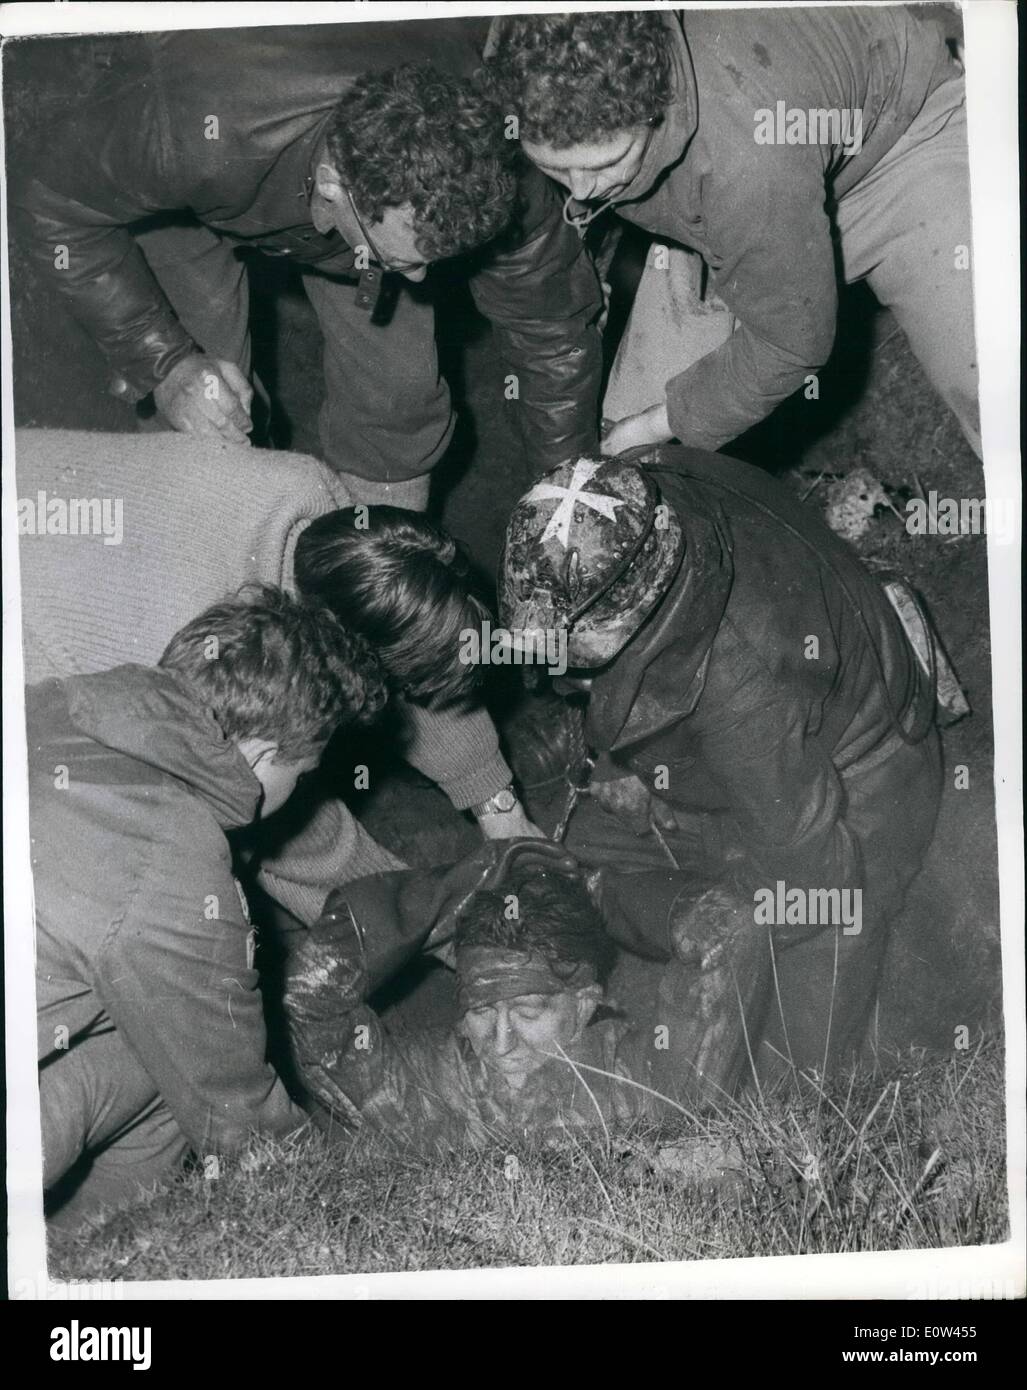 Apr. 04, 1961 - Potholer rescued in fifteen hour drama, Struggle at Simon's Pot, Kingsdale, nr. Ingleton-Yorkshire. More than 100 rescuers toiled for fifteen hours yesterday to bring 21 year old potholer Graham Shaw to the surface. The drama went on all night for Shaw was struck by a falling rock when a ladder gave way, and he lay at the bottom of the pothole with a broken leg and head injuries - and in need of a blood transfusion . After his rescue he was given be taken to hospital - where his condition is said to be satisfactory Stock Photo